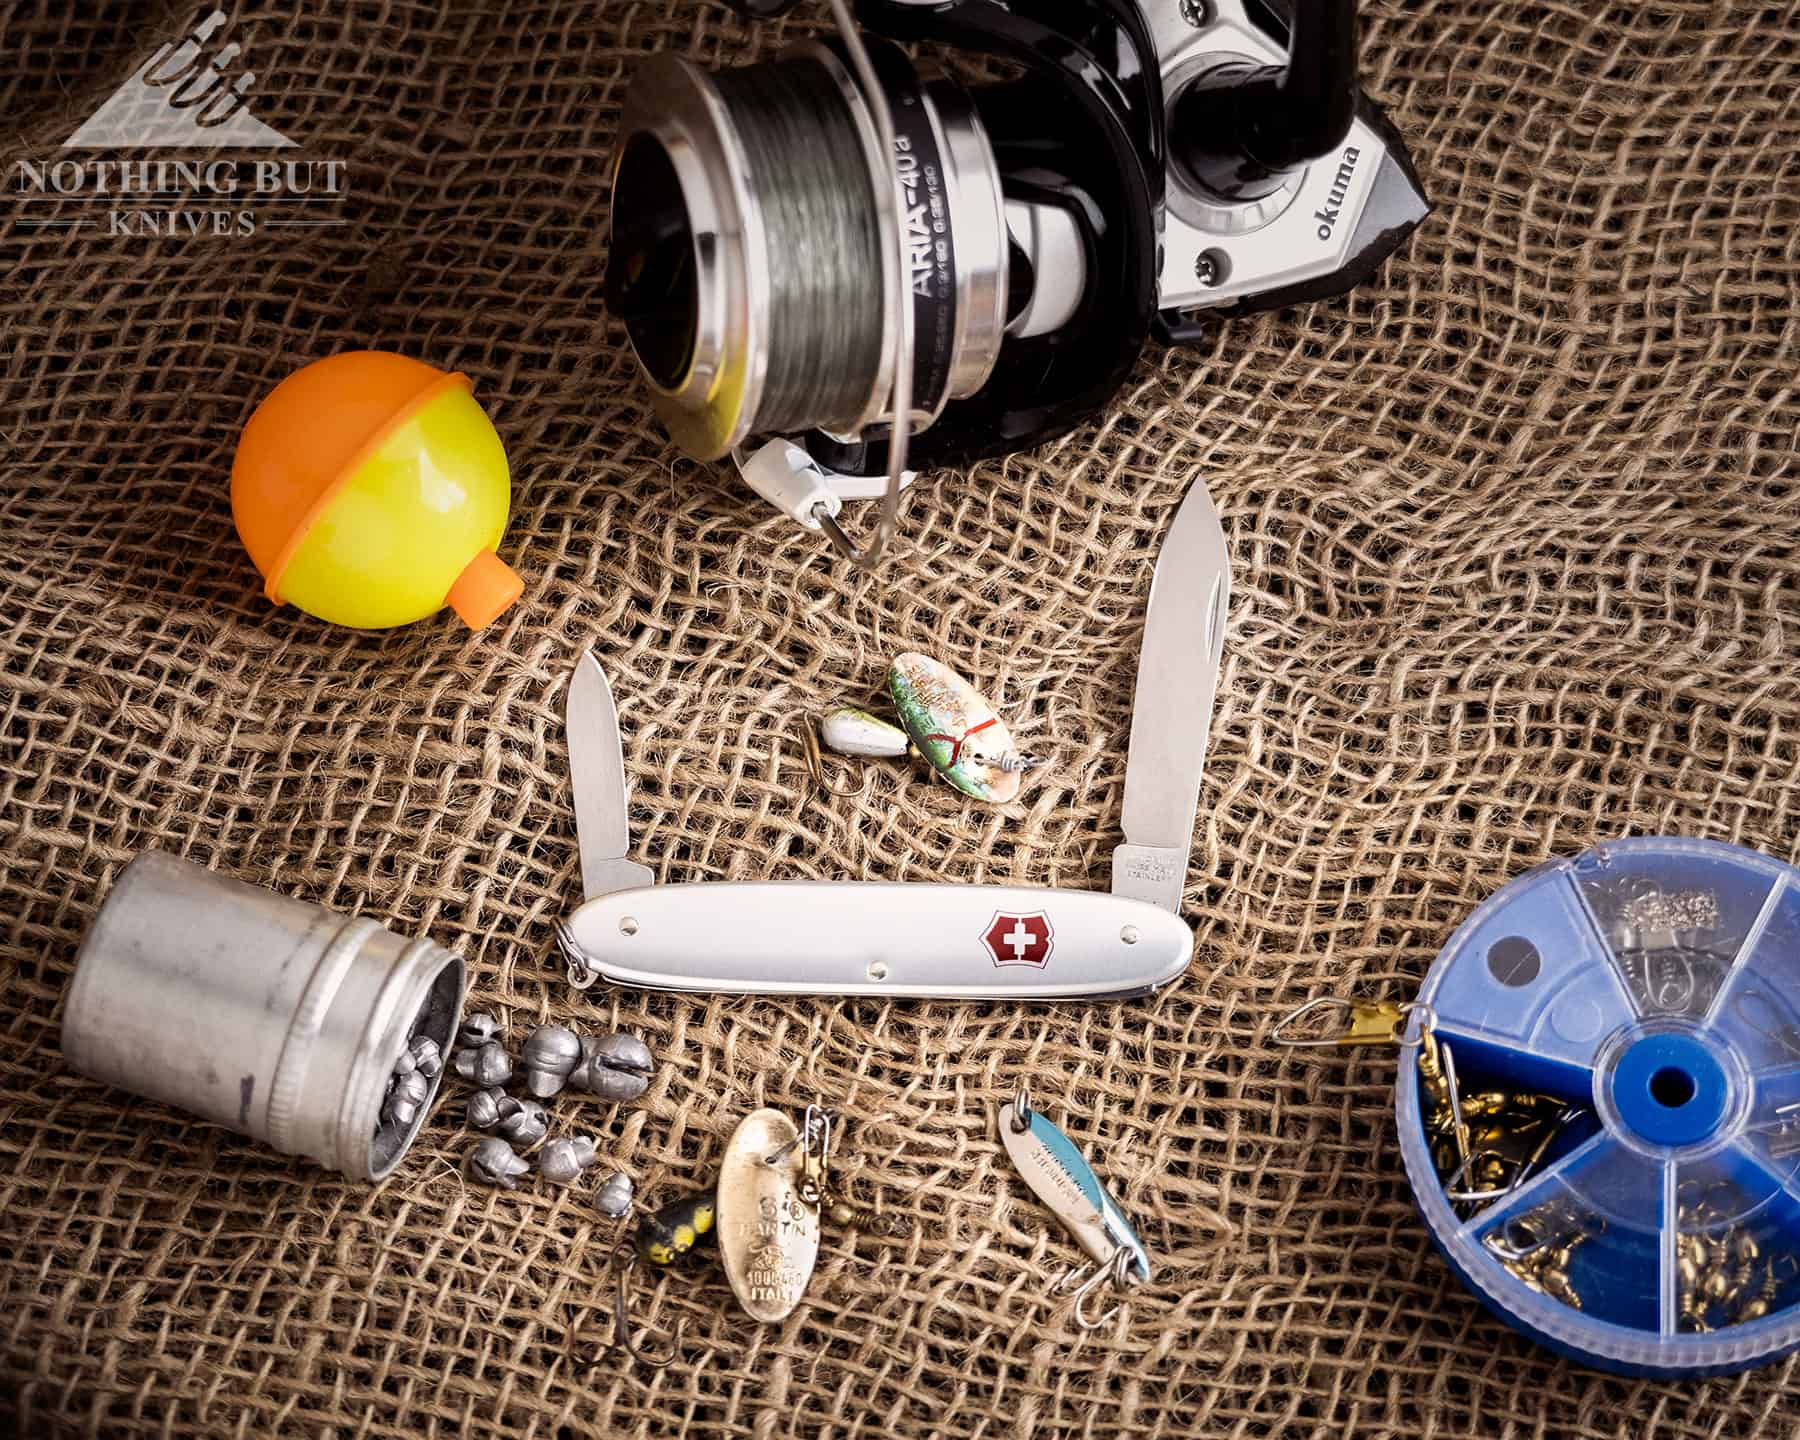 The Victorinox Secretary slip joint pocket knife makes nice addition to a fishing kit. It is shown here with fishing gear on a burlap background.  